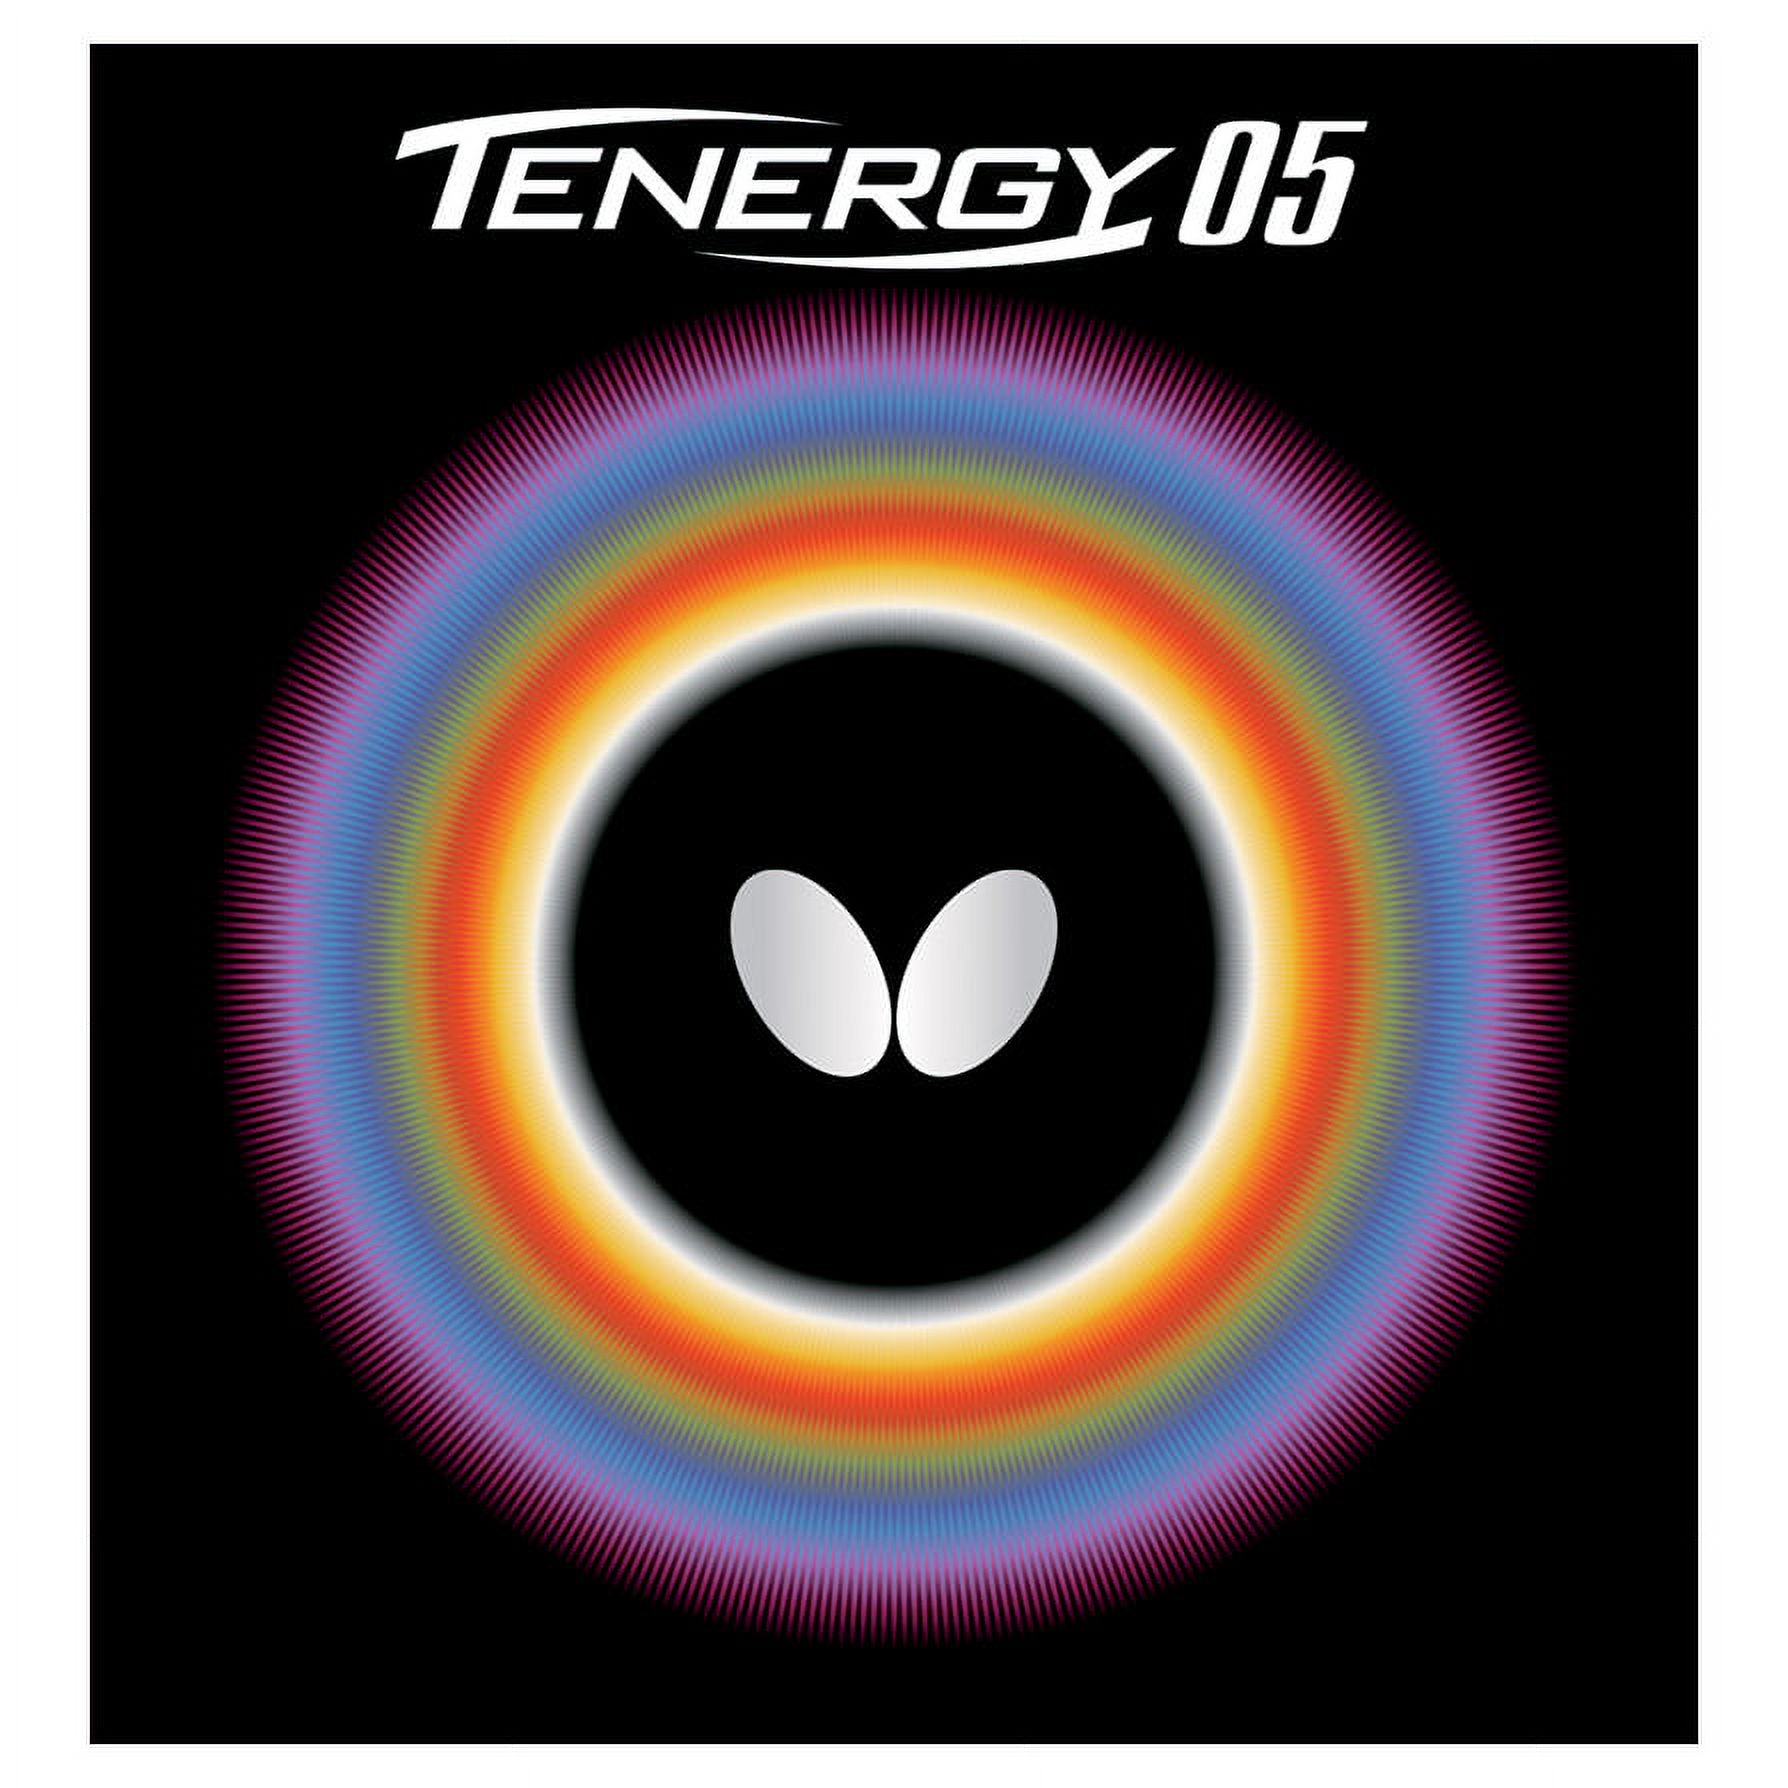 Butterfly Tenergy 05 Table Tennis Rubber, 1.9 mm, Black - image 1 of 4